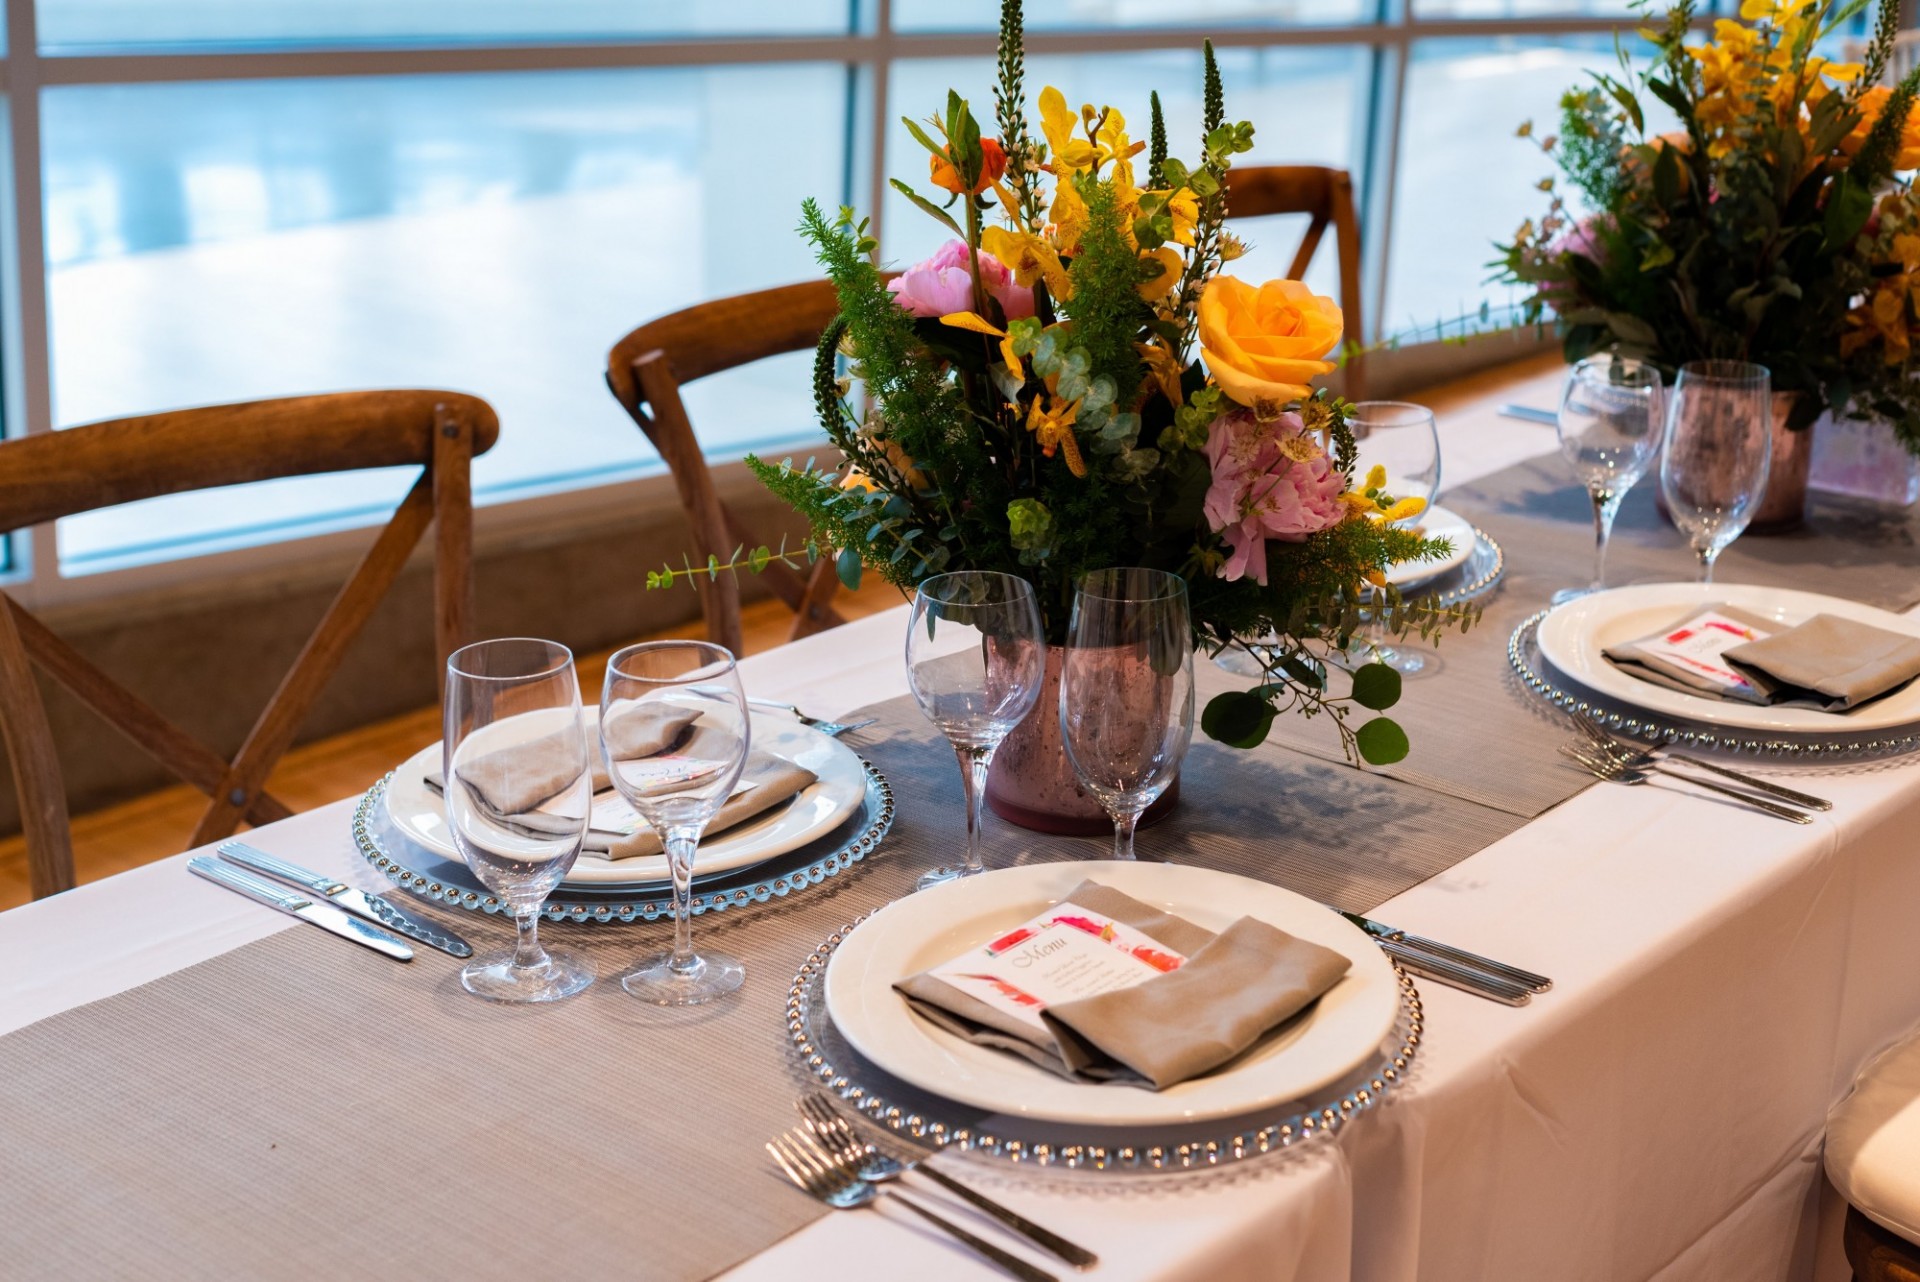 A burlap table runner dresses a long table featuring place settings and flowers in a vase